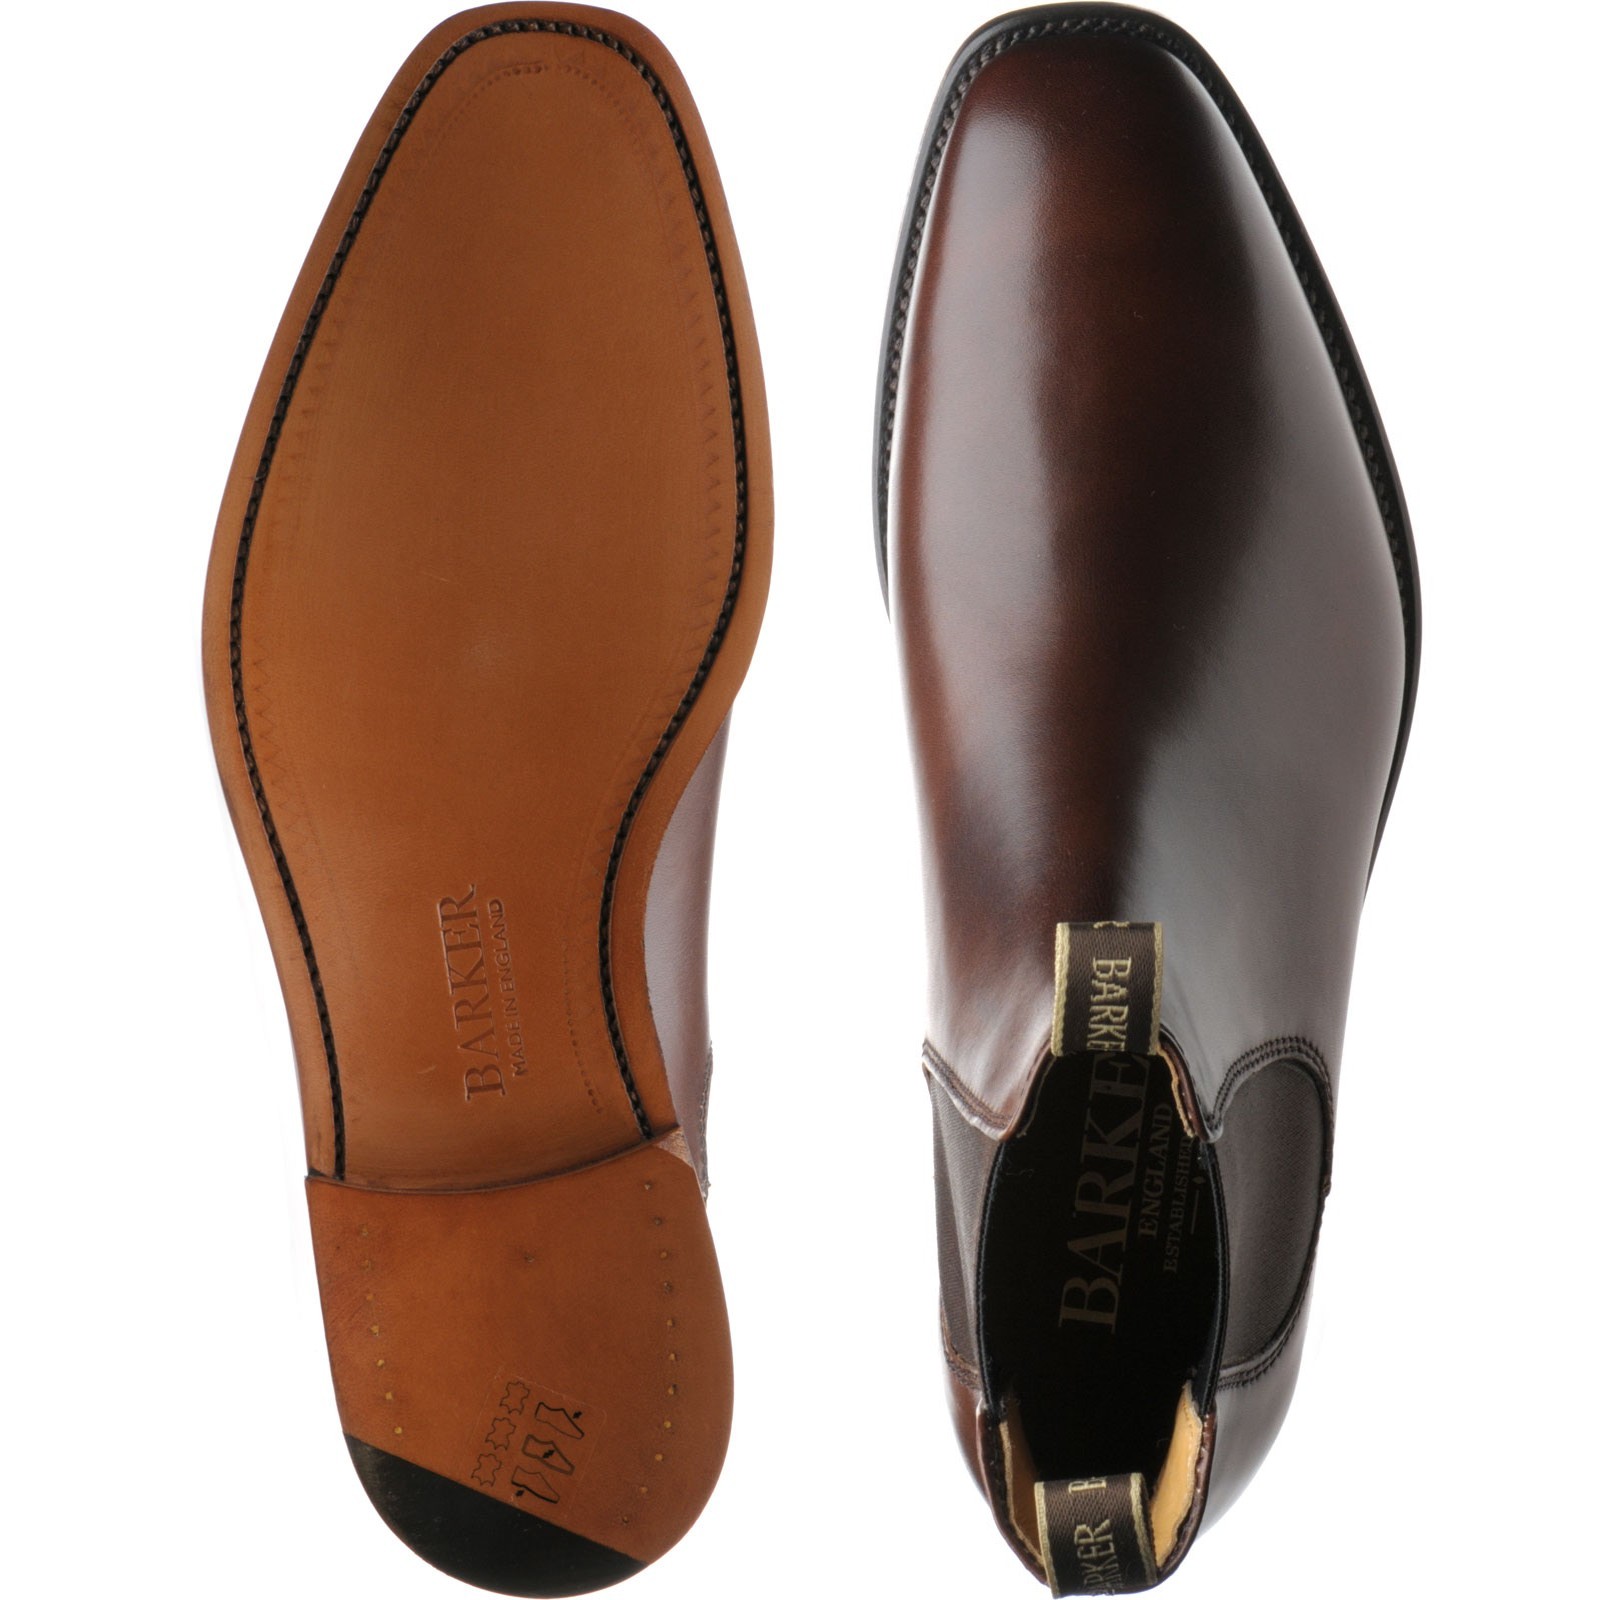 Barker shoes | Barker Professional | Mansfield in Walnut Calf at ...